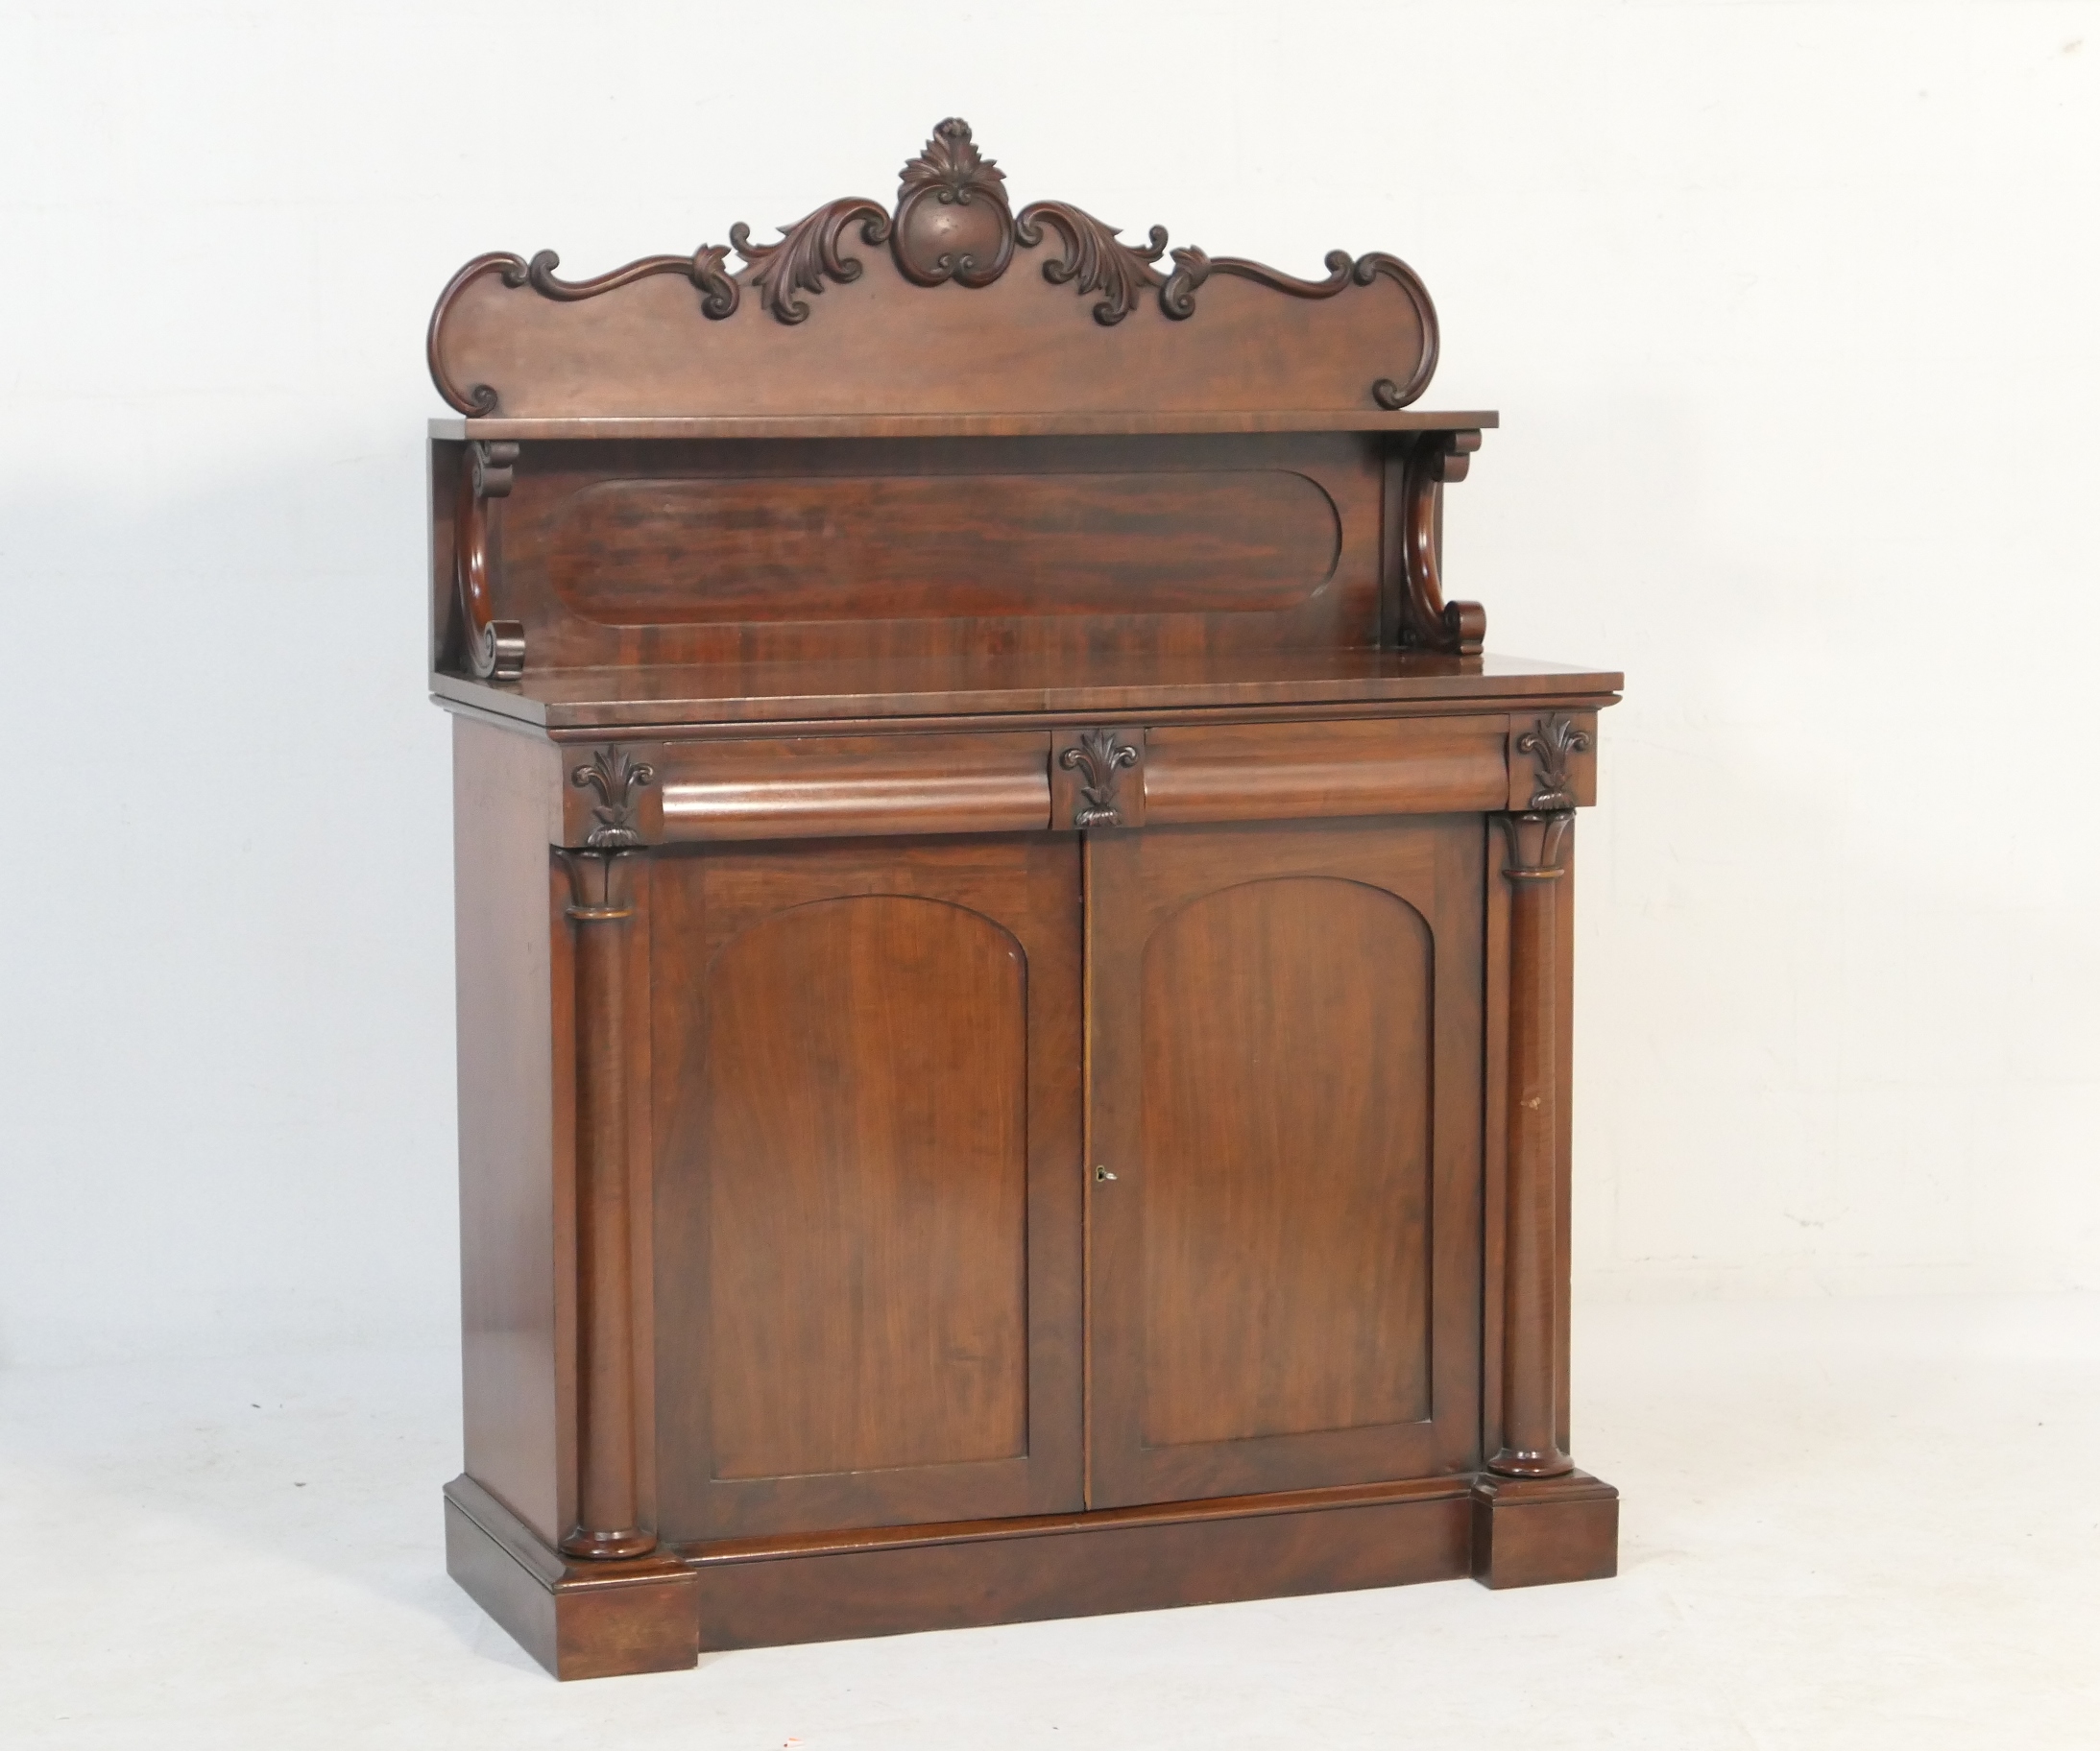 Victorian mahogany chiffonier, circa 1860, having a carved panel back with a shelf over a base